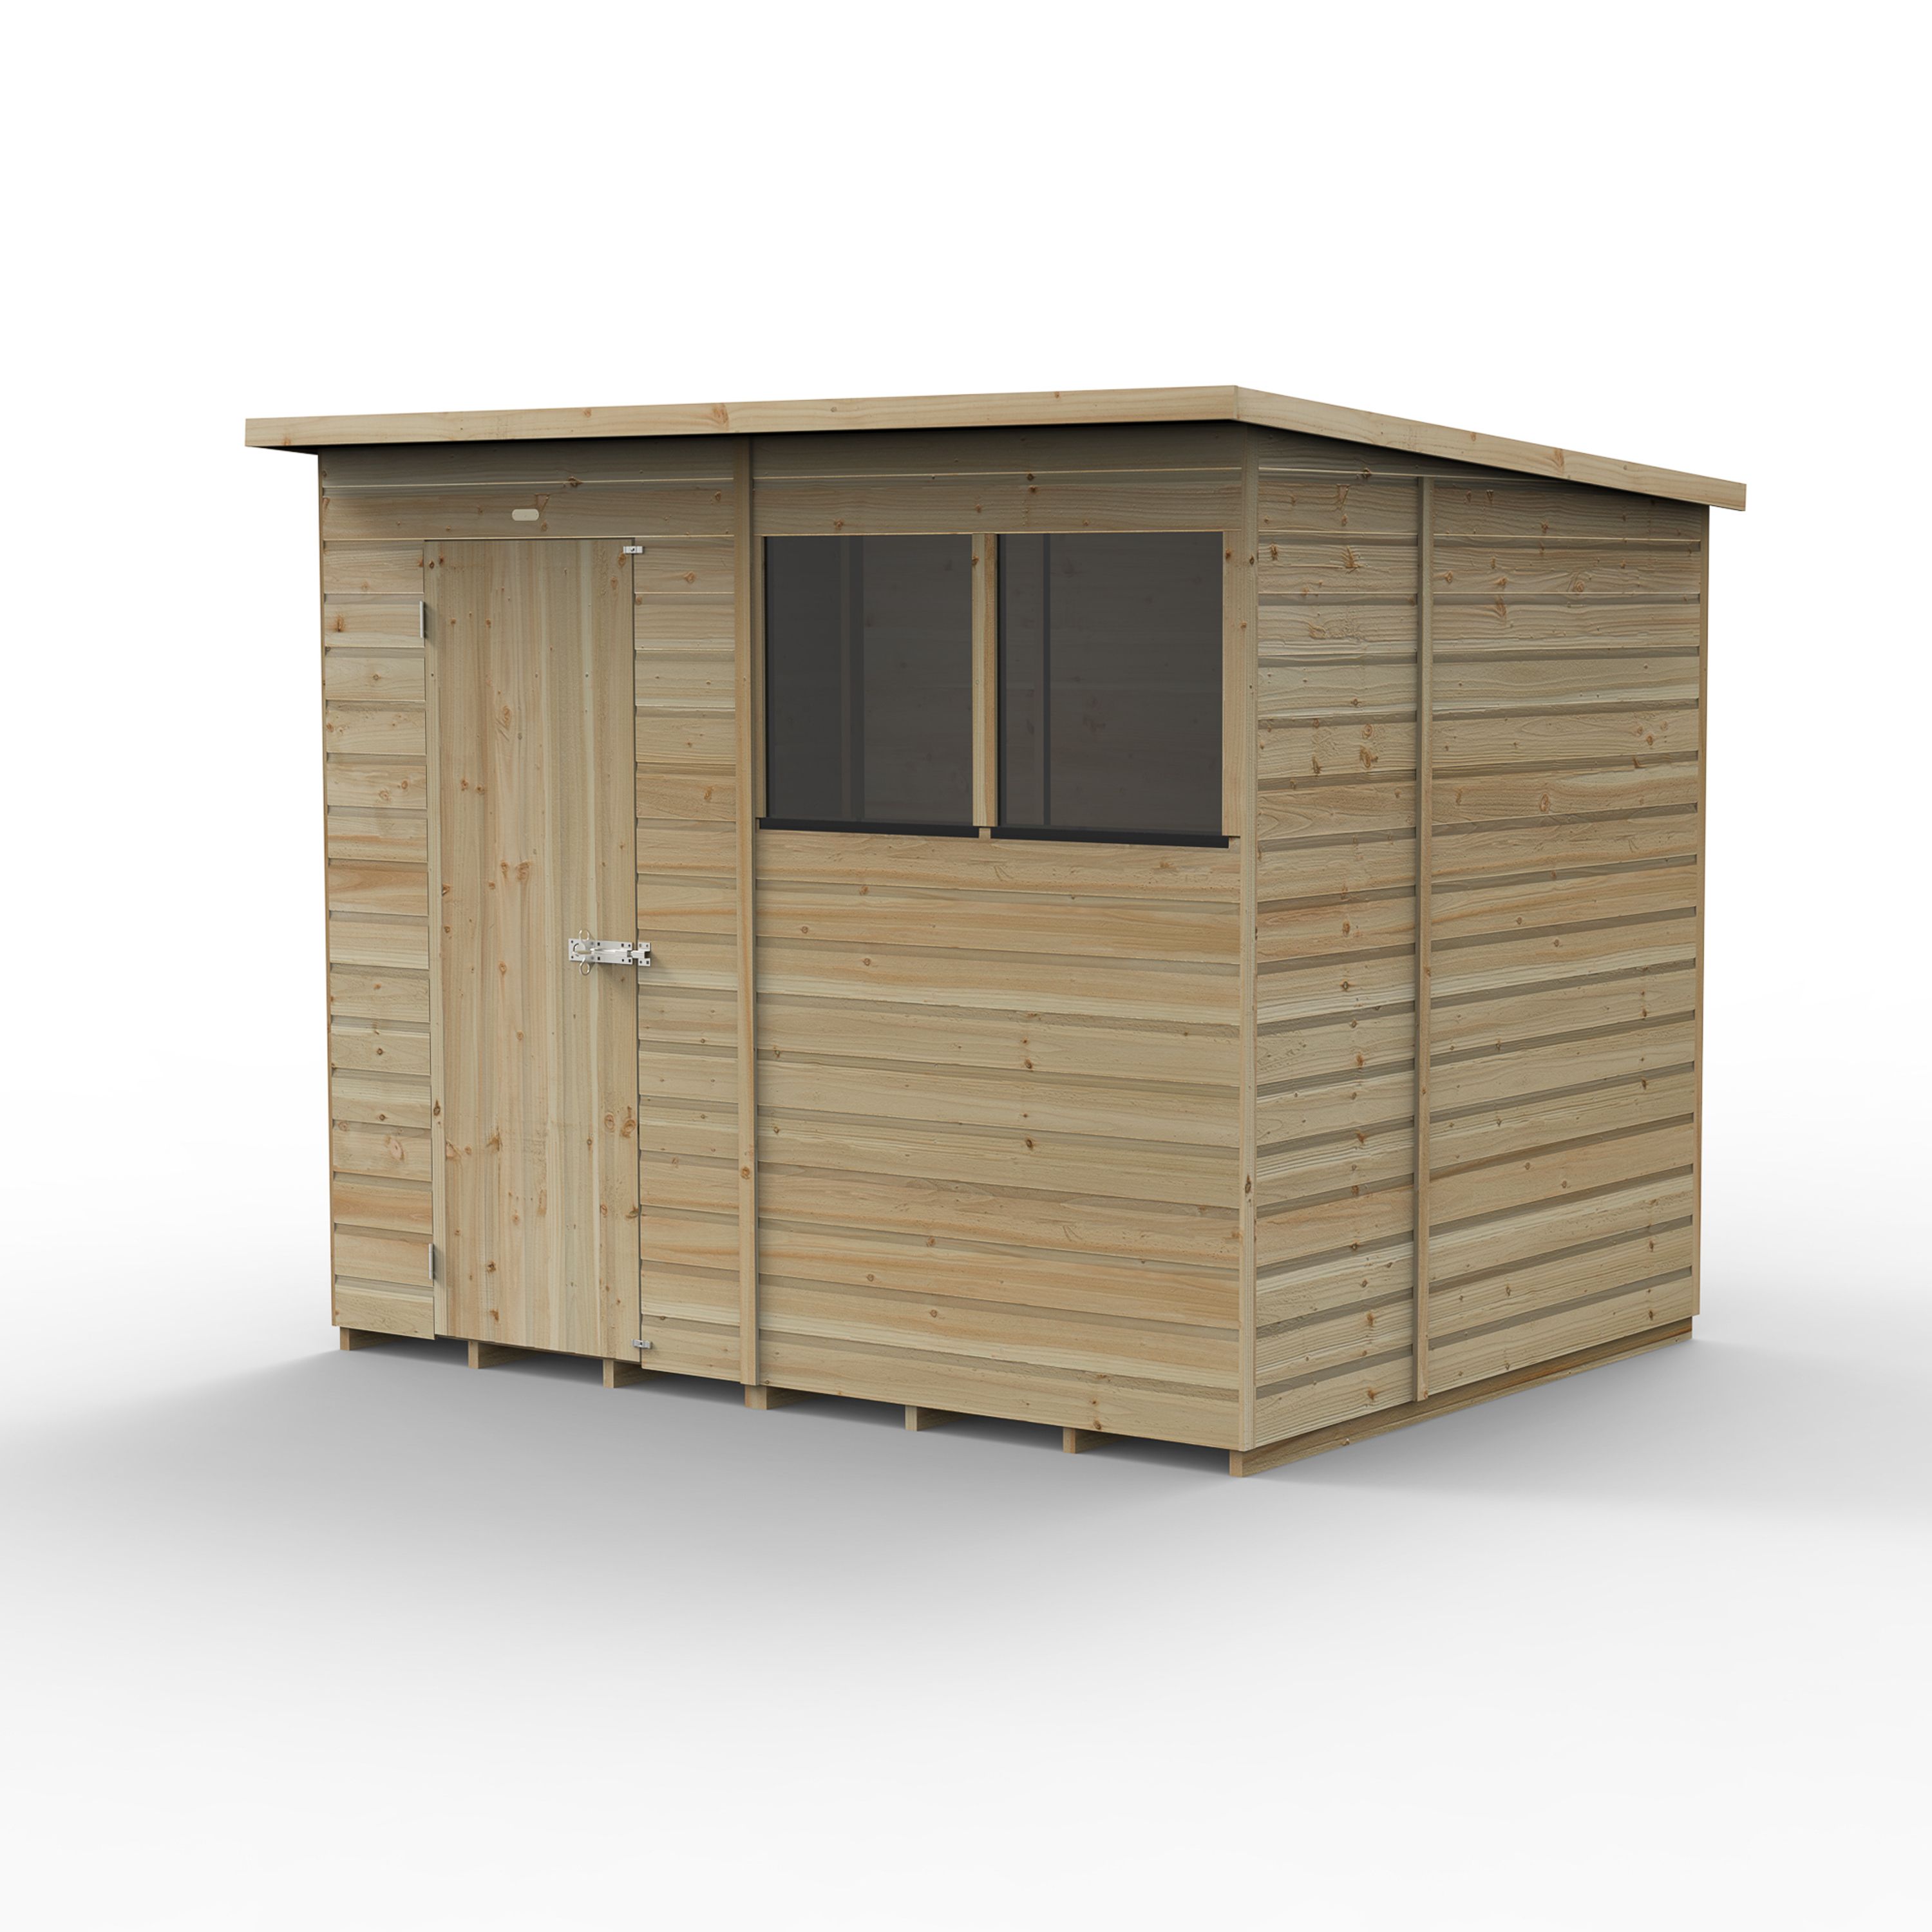 Forest Garden Beckwood 8x6 ft Pent Natural timber Wooden Shed with floor & 2 windows (Base included) - Assembly not required